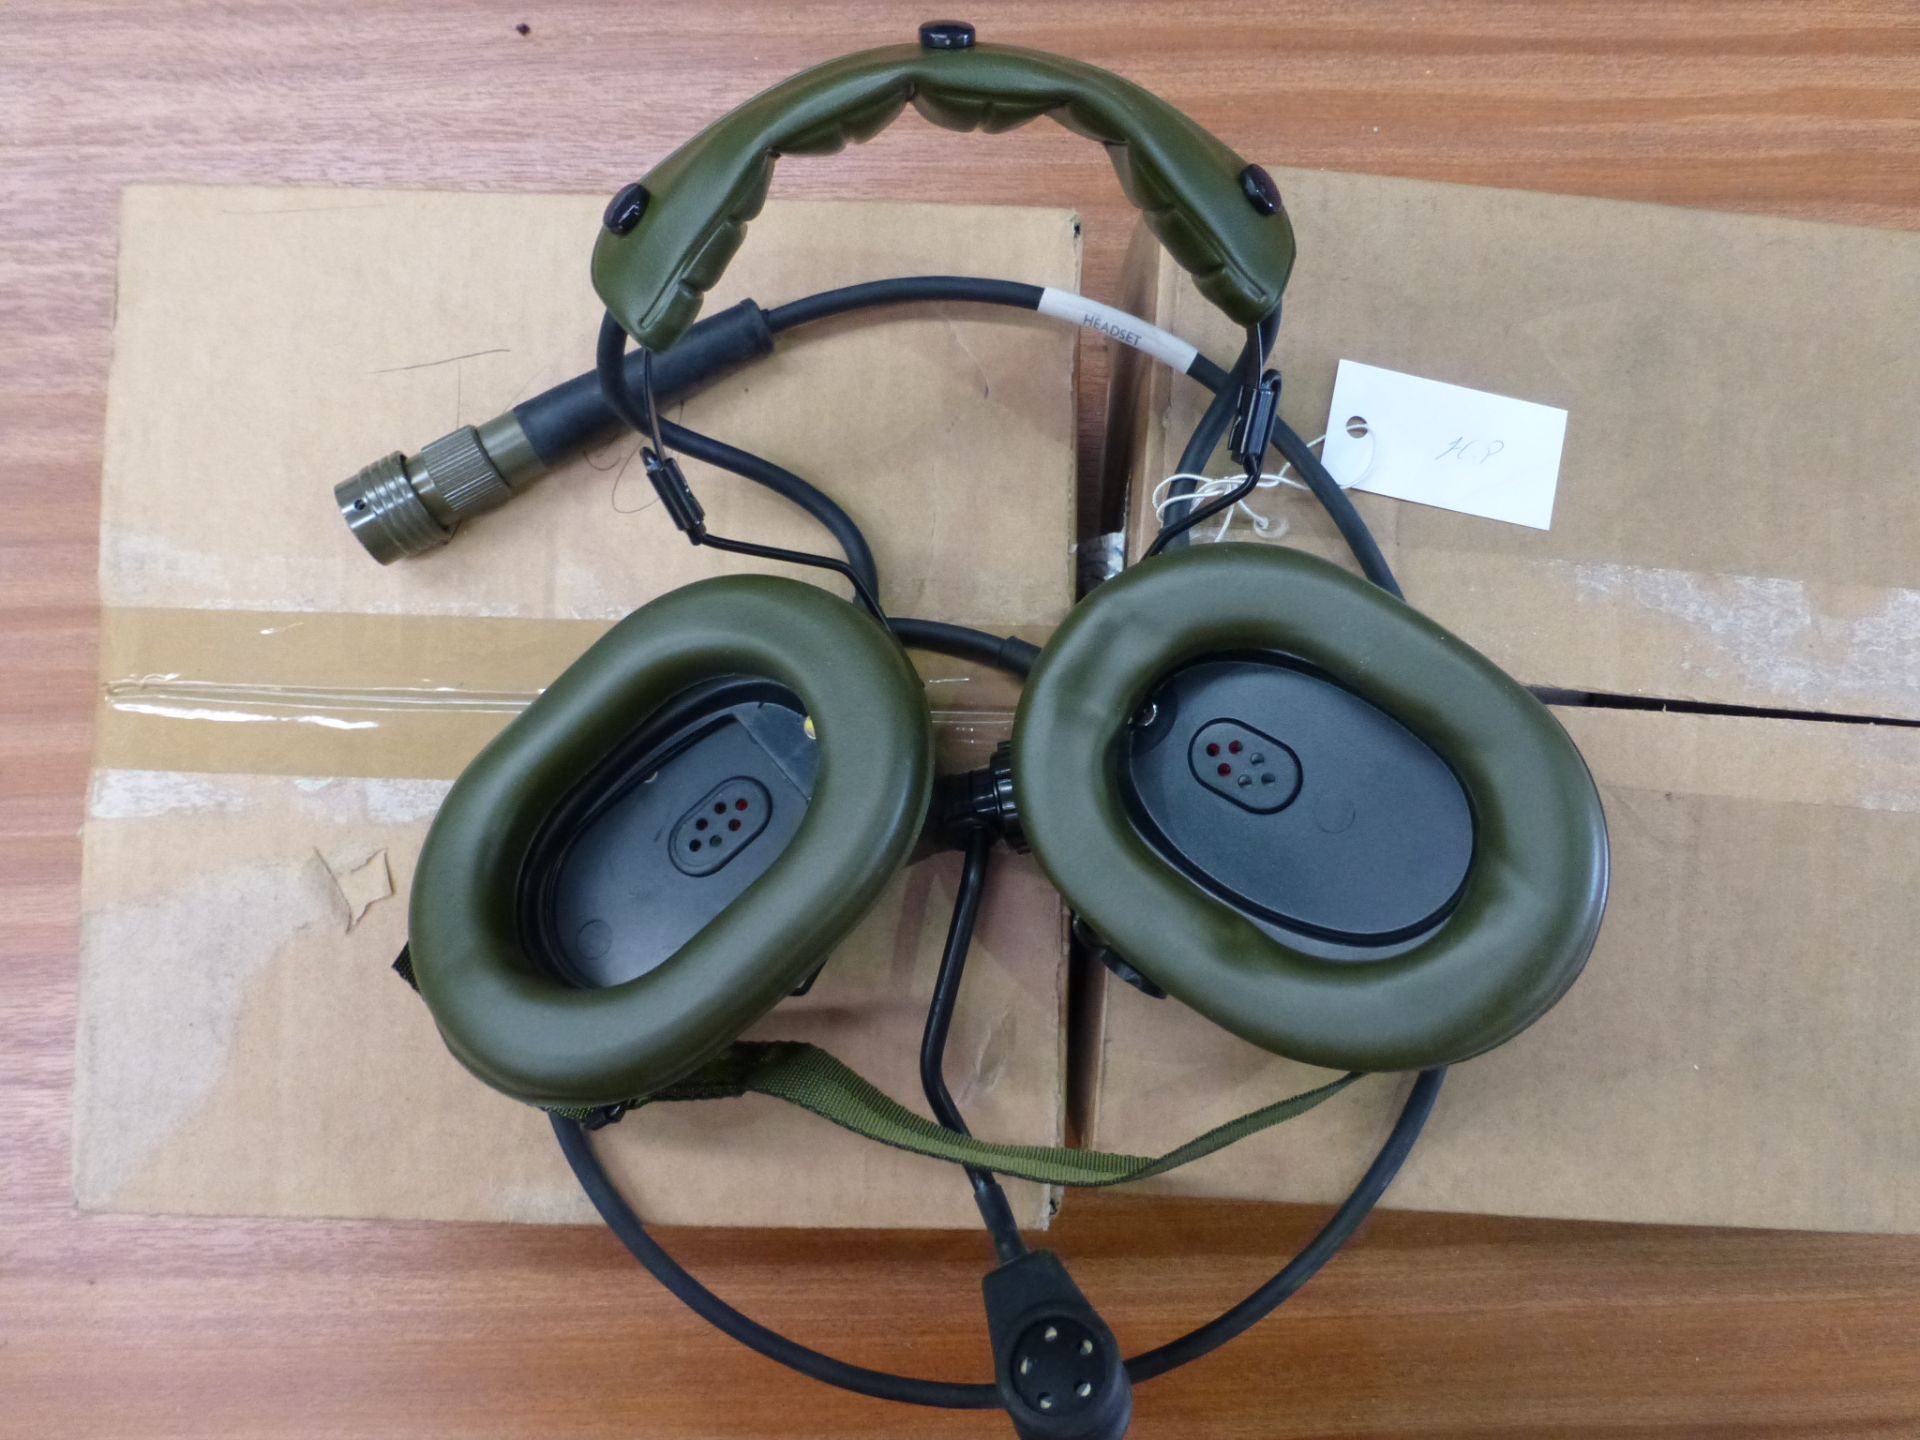 2 x Clansman Racal Headsets - Image 3 of 5